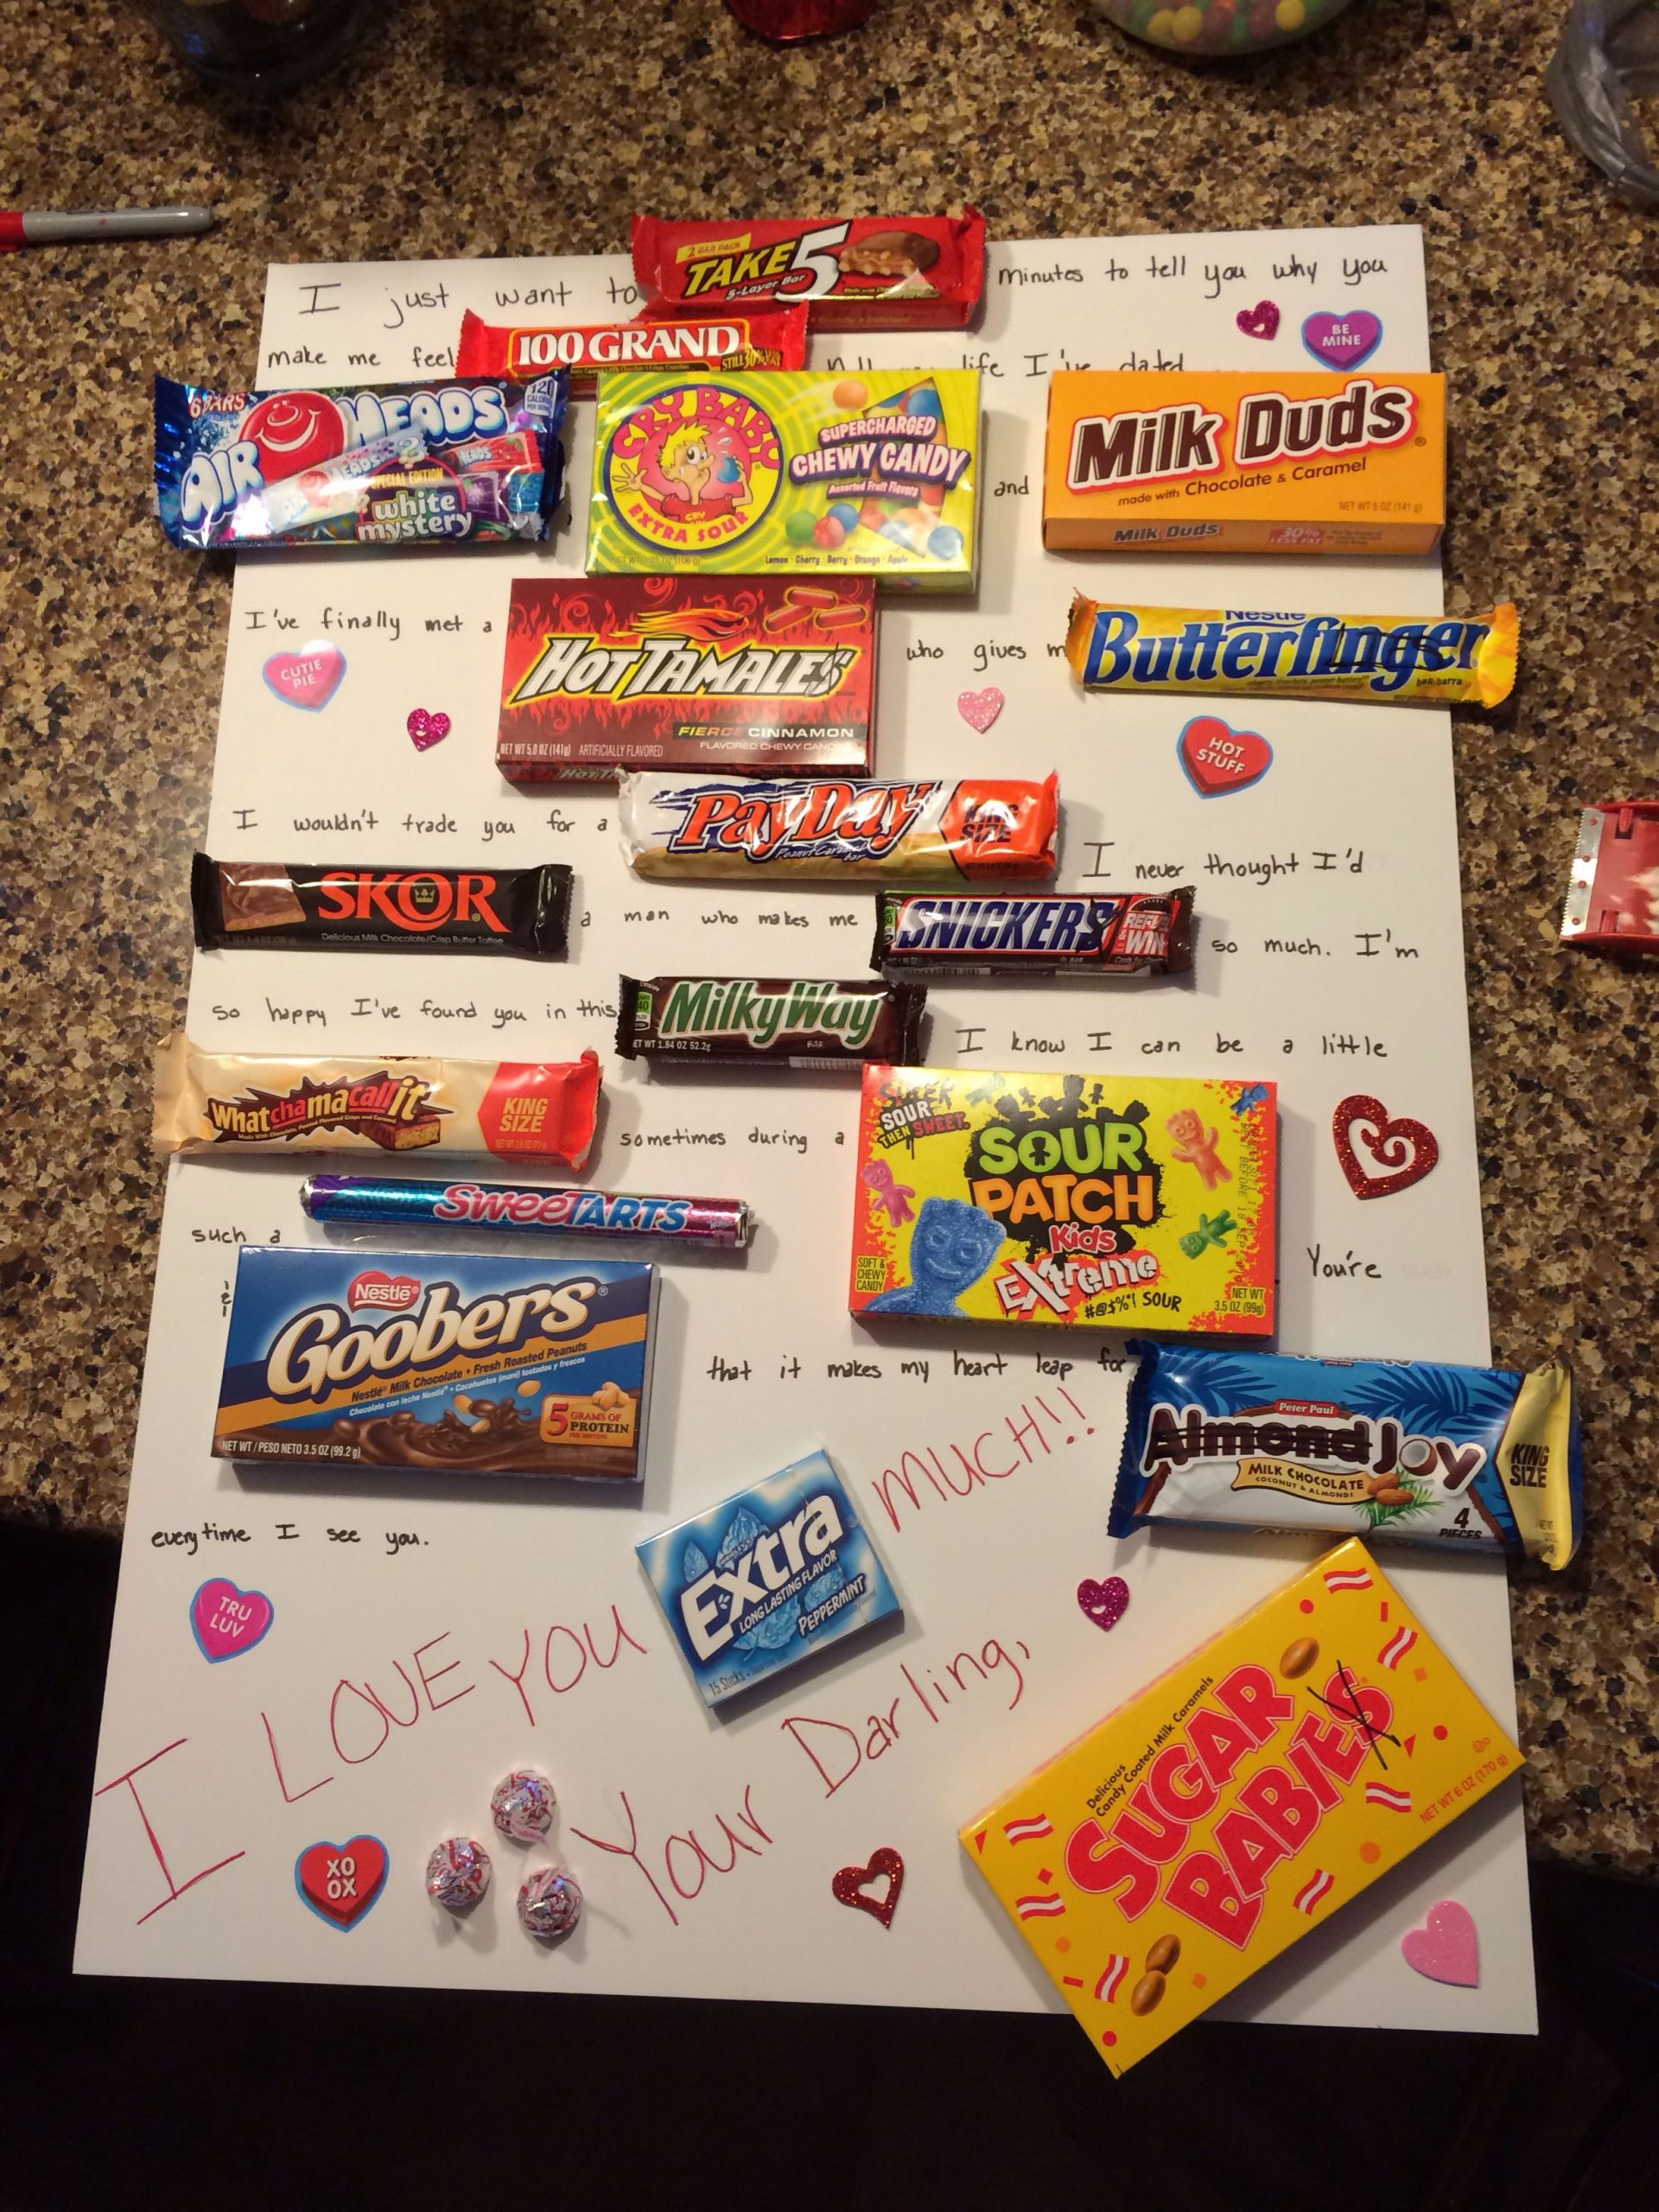 Cute Ideas For Valentines Day For Her
 A Cute valentines day candy card my friend had the idea to